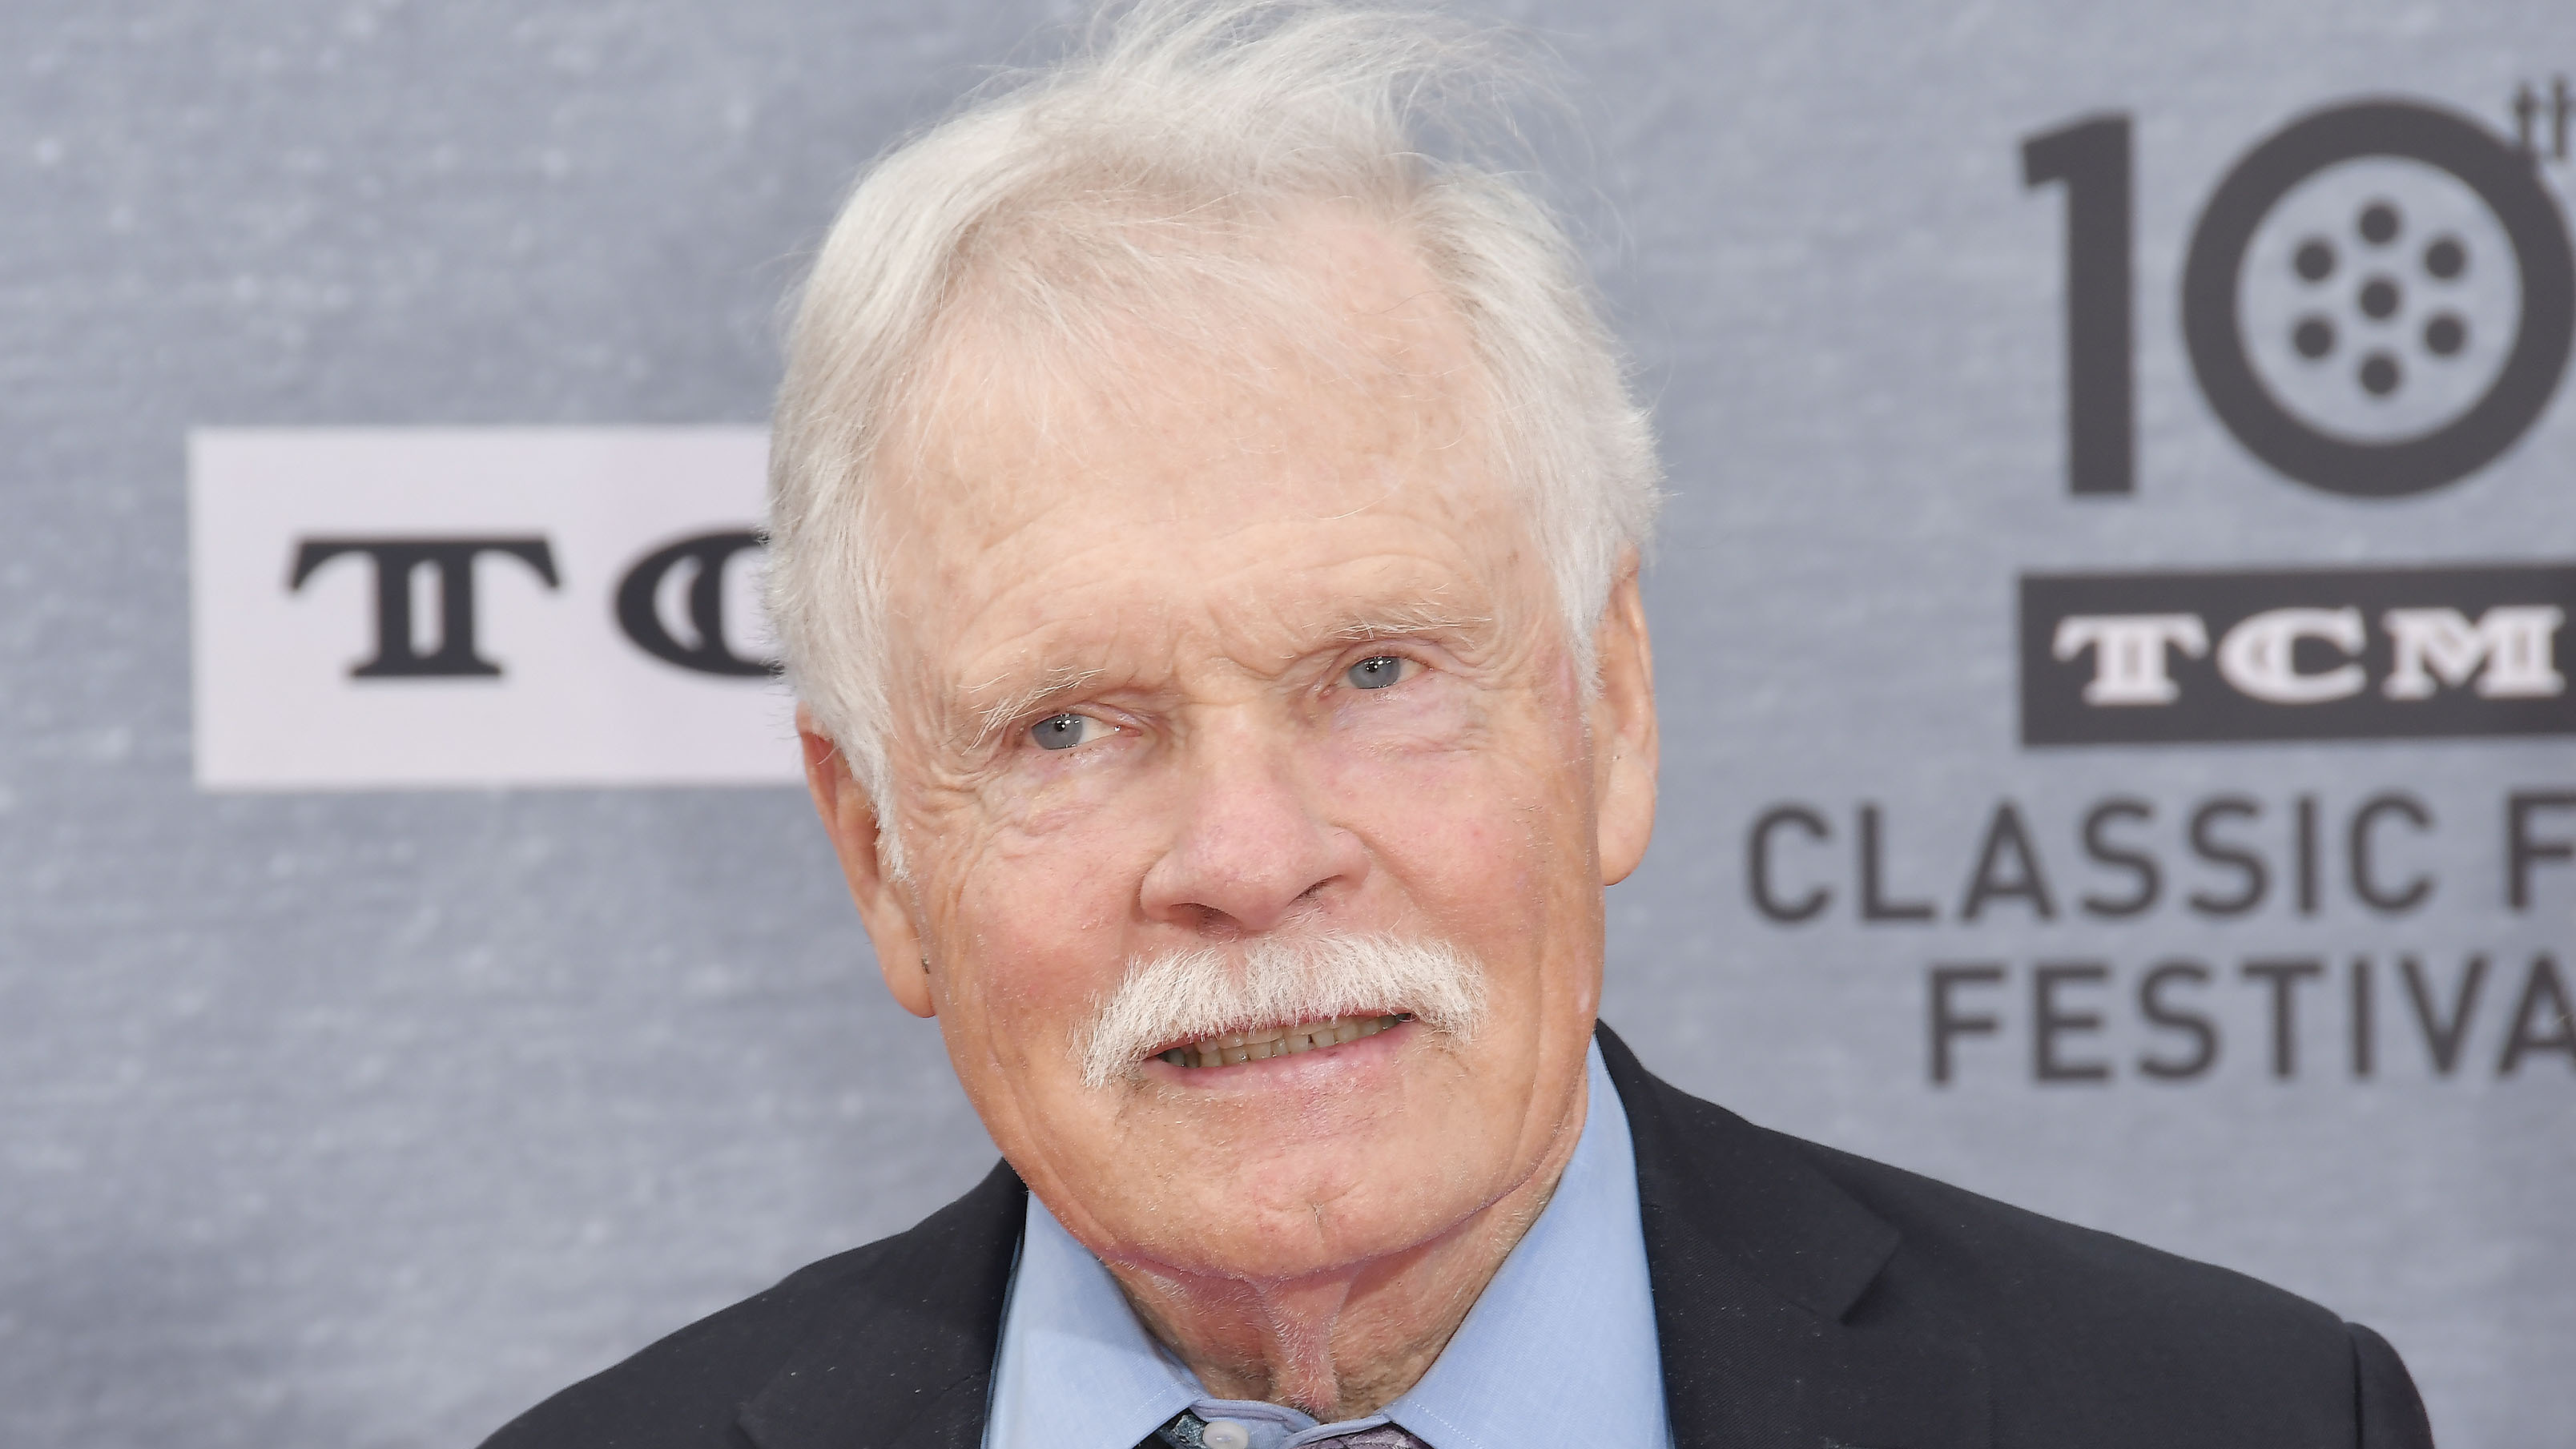 Ted Turner Made Video To Play On CNN At The End Of The World